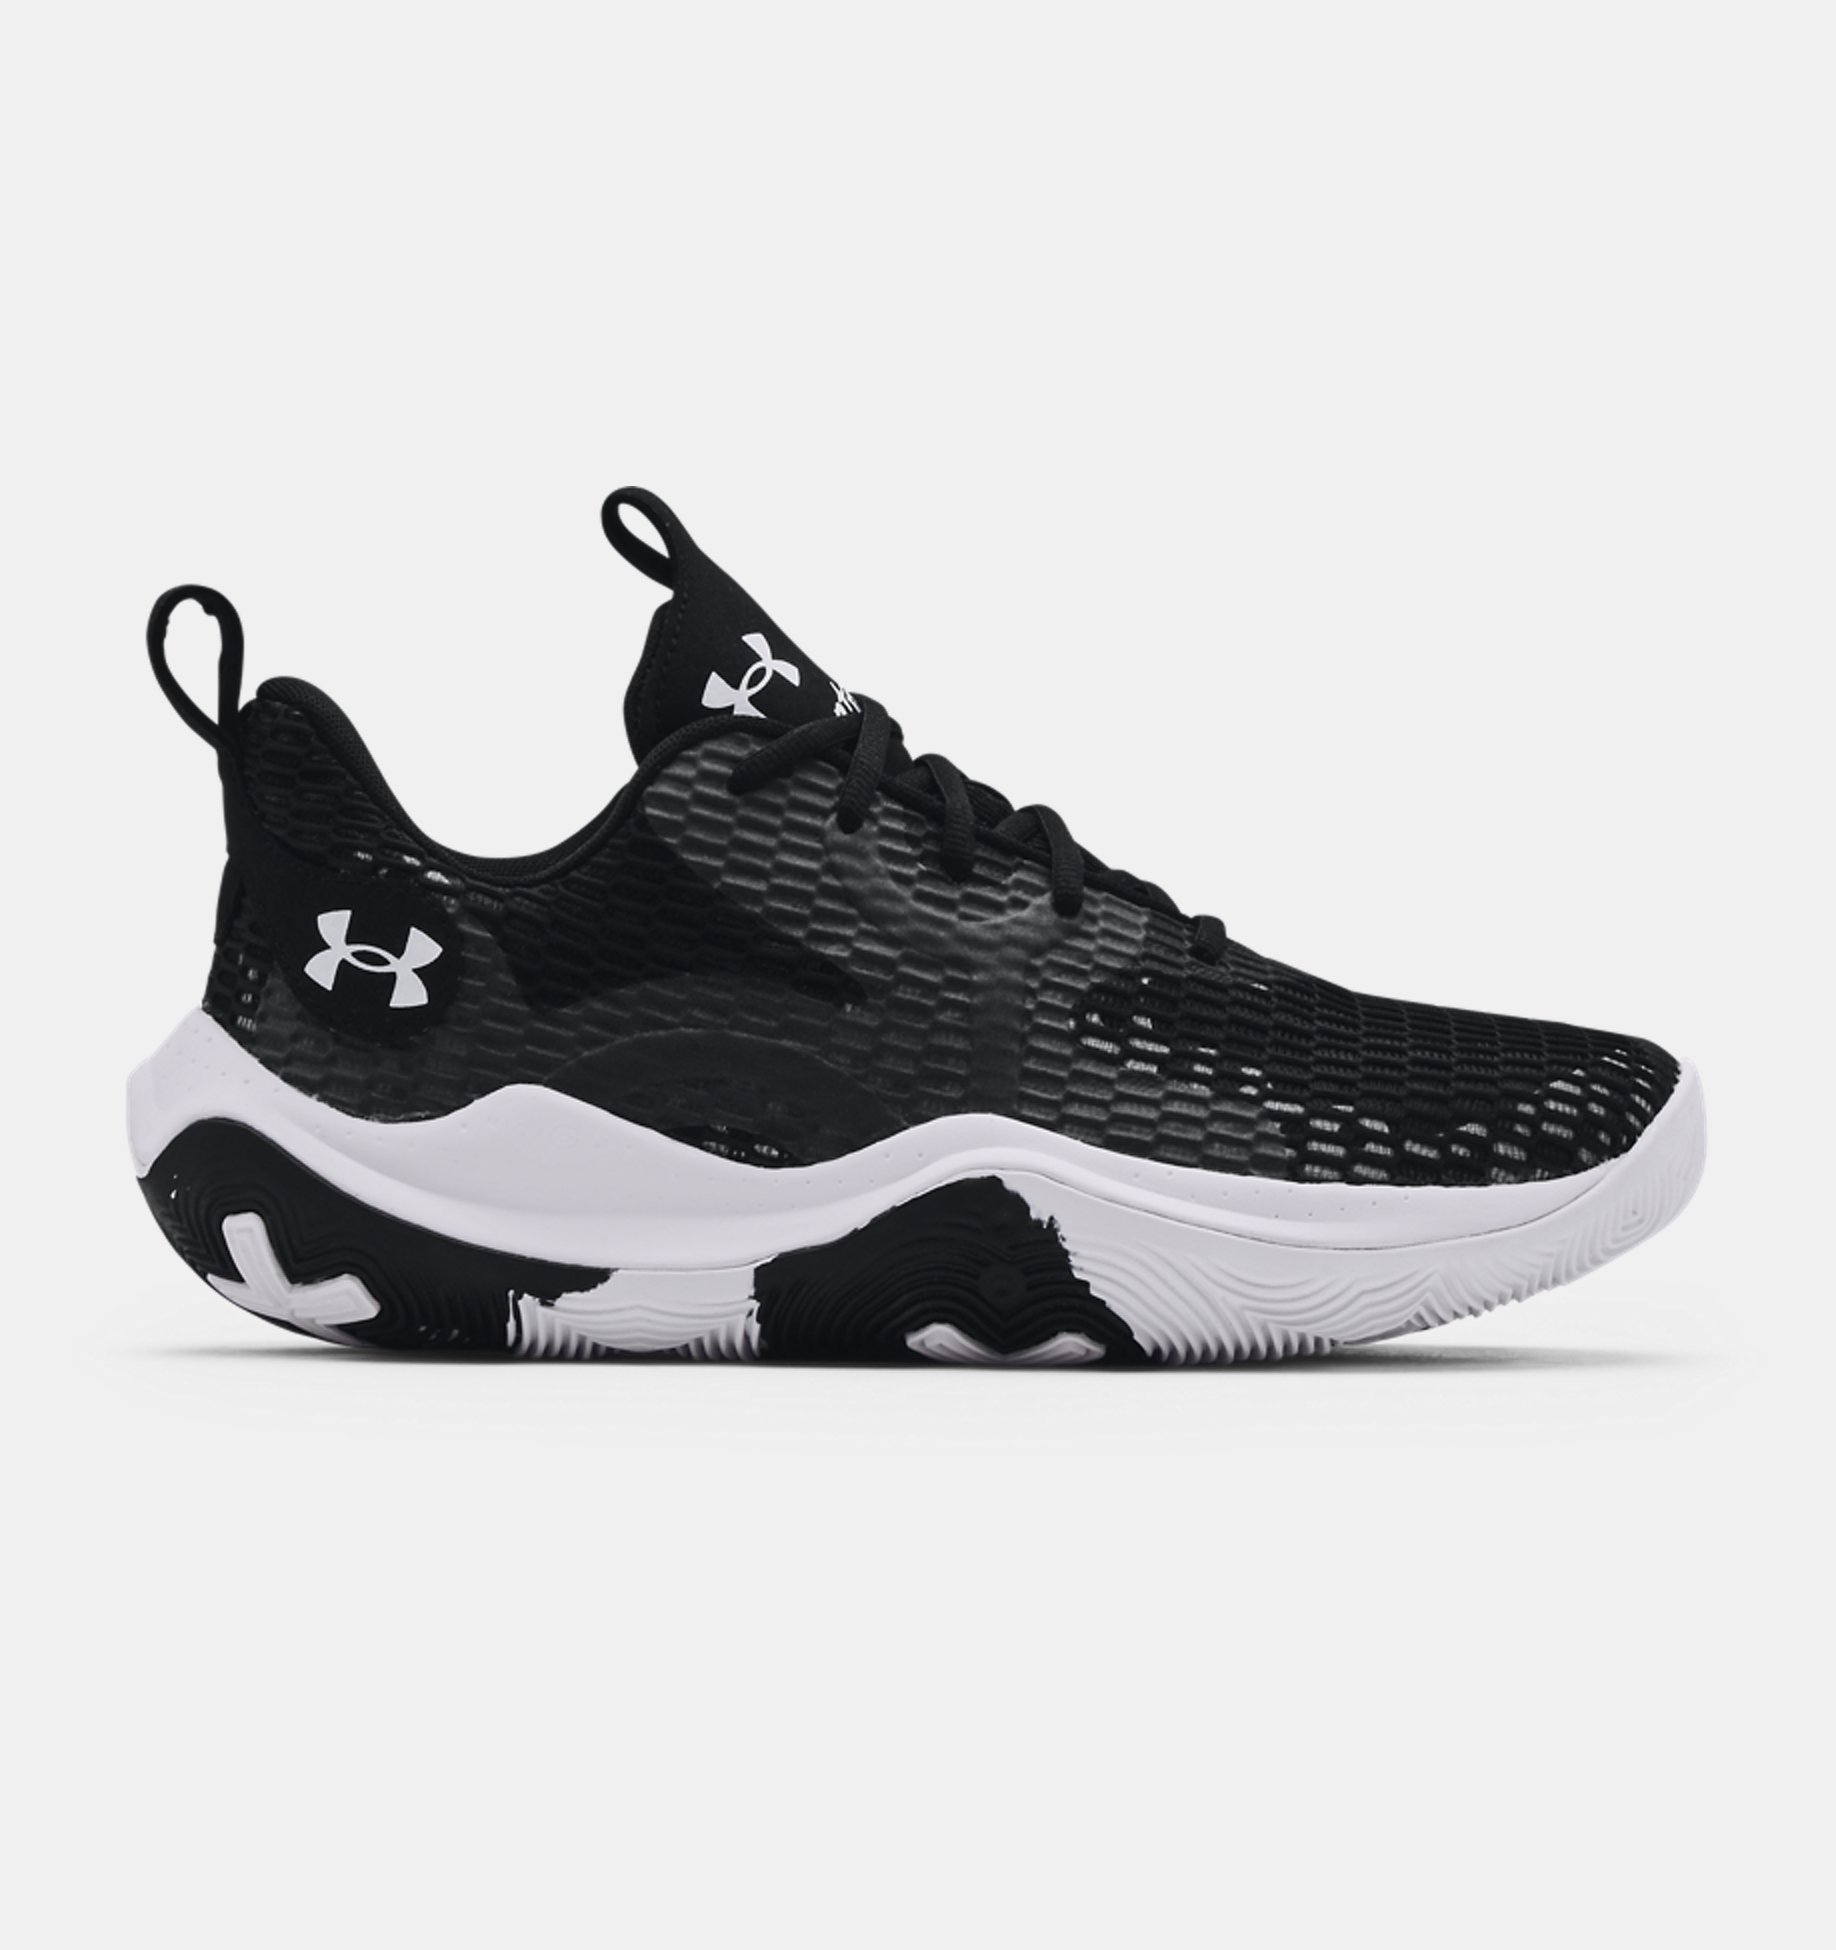 Under Armour Chaussures Athlétiques